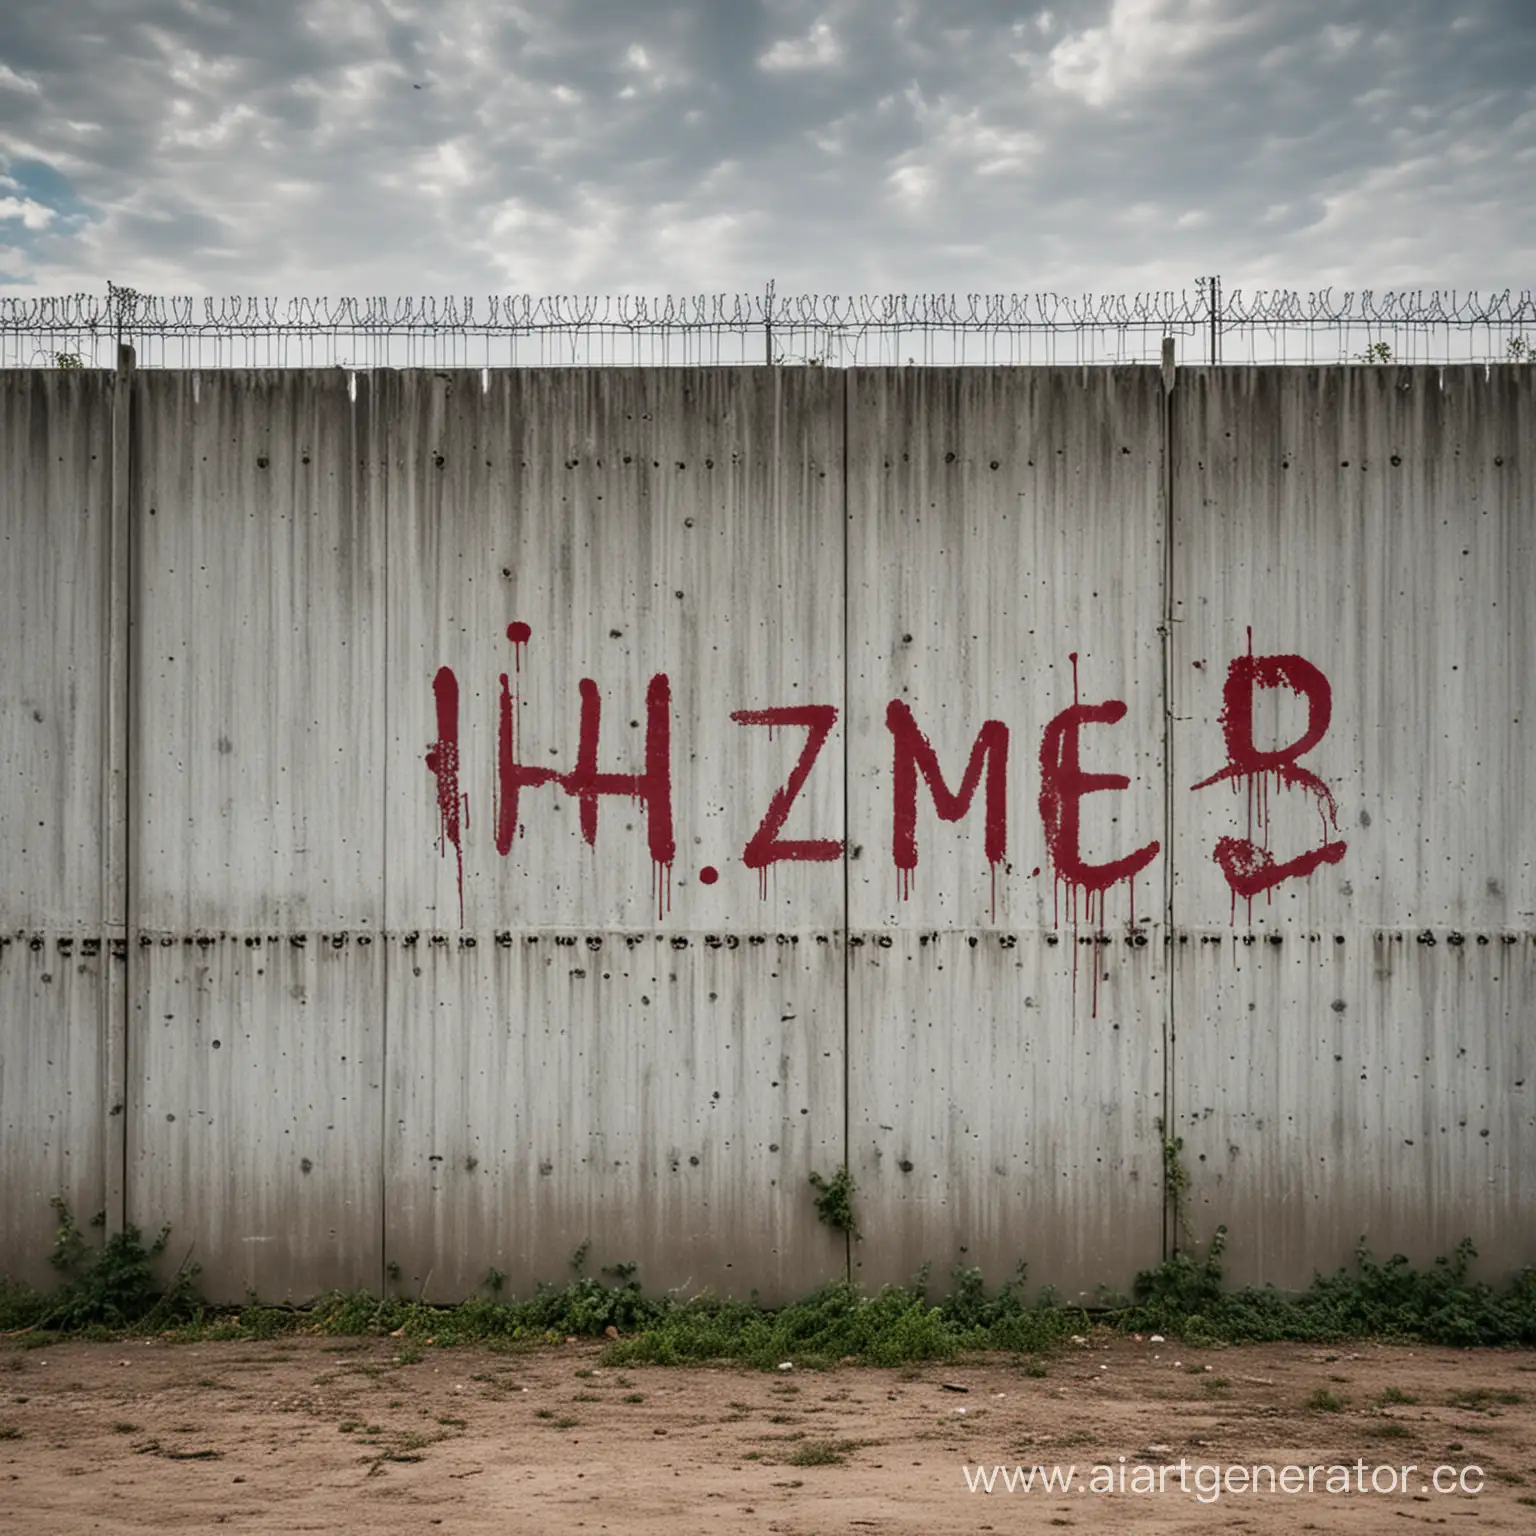 Industrial-Zone-Concrete-Fence-with-UHUZBS-and-EAT-ME-PLEASE-Graffiti